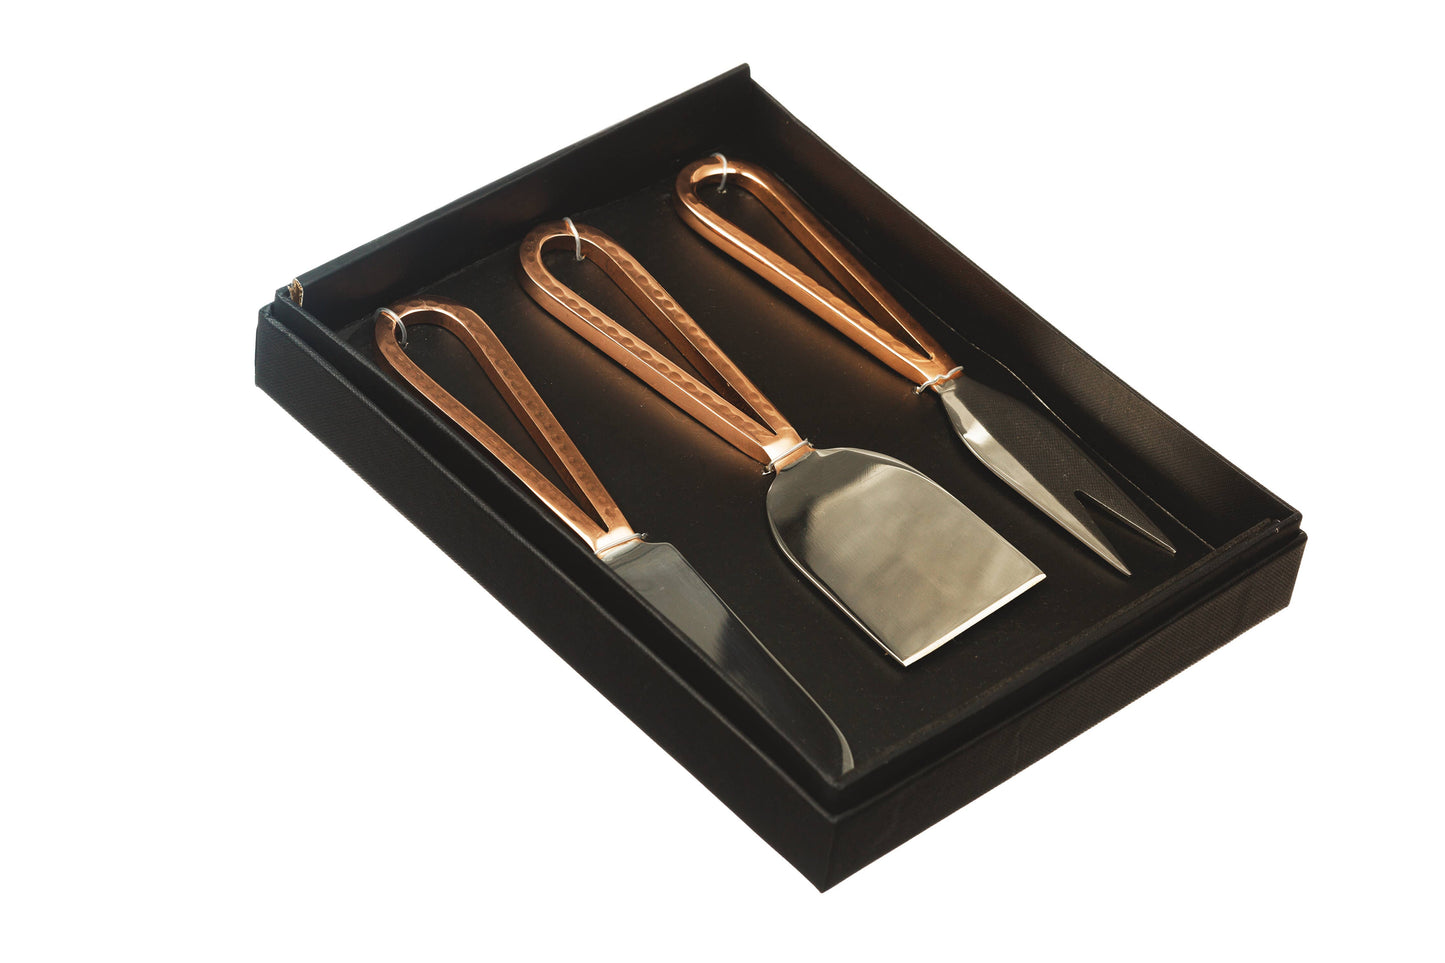 3 Copper Cheese Knives - Grace & Haven